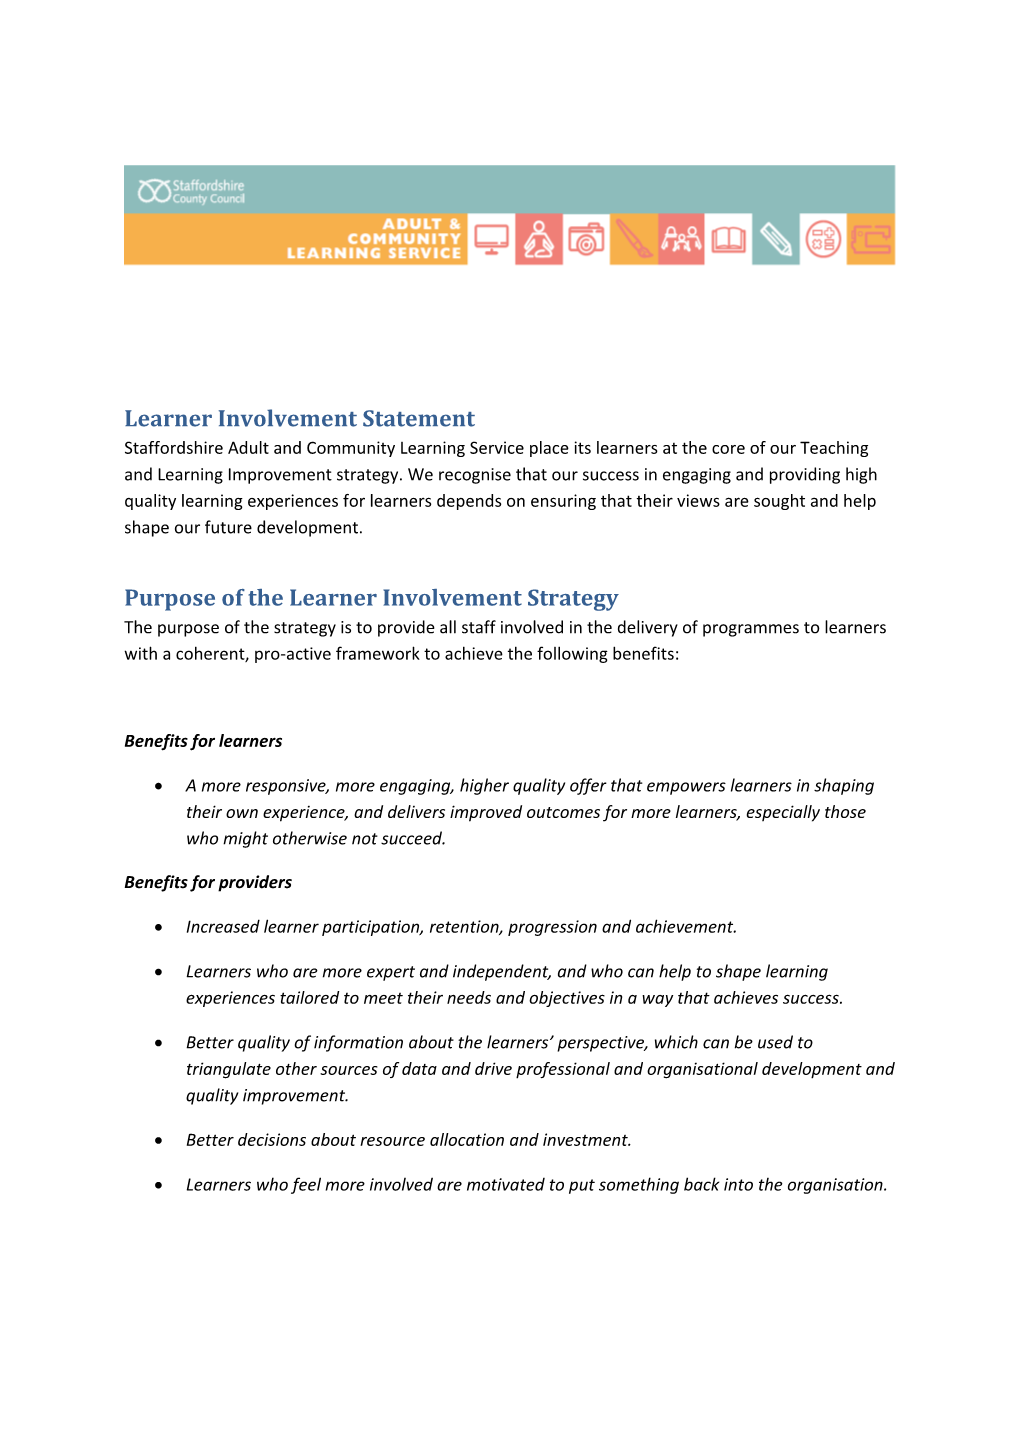 Purpose of the Learner Involvement Strategy